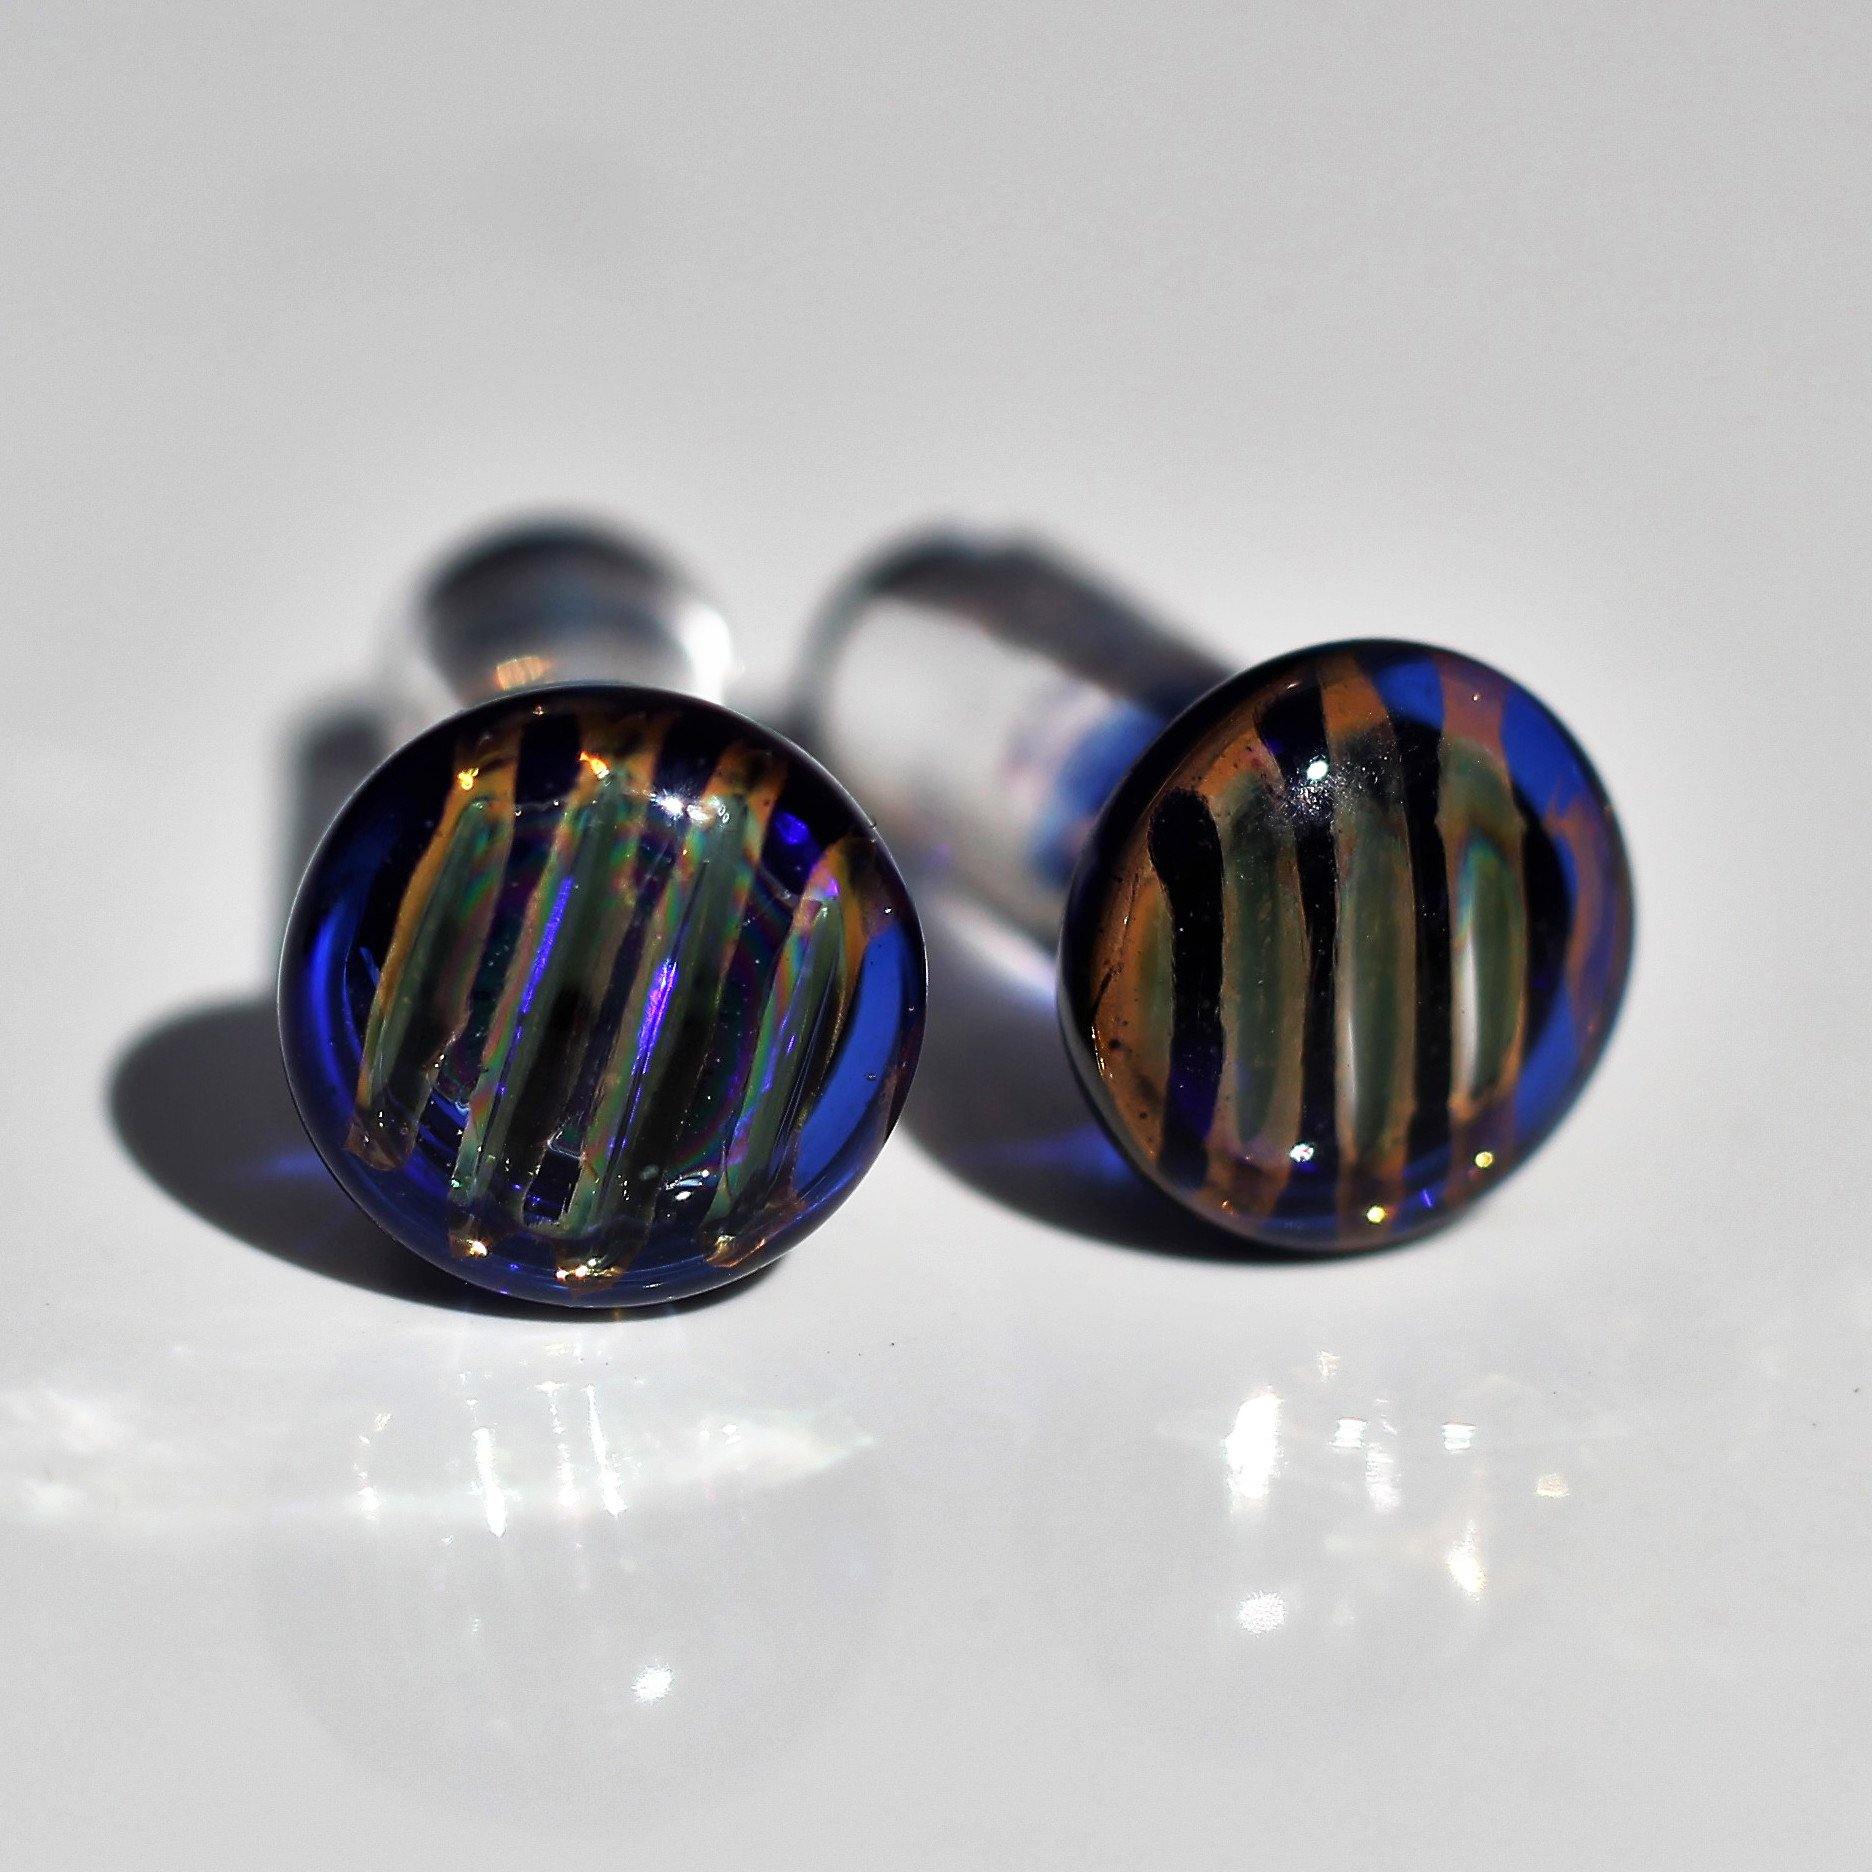 Single Flare Fumed Plugs by Glasshouse 33 Plugs 4 gauge (5mm) Gold